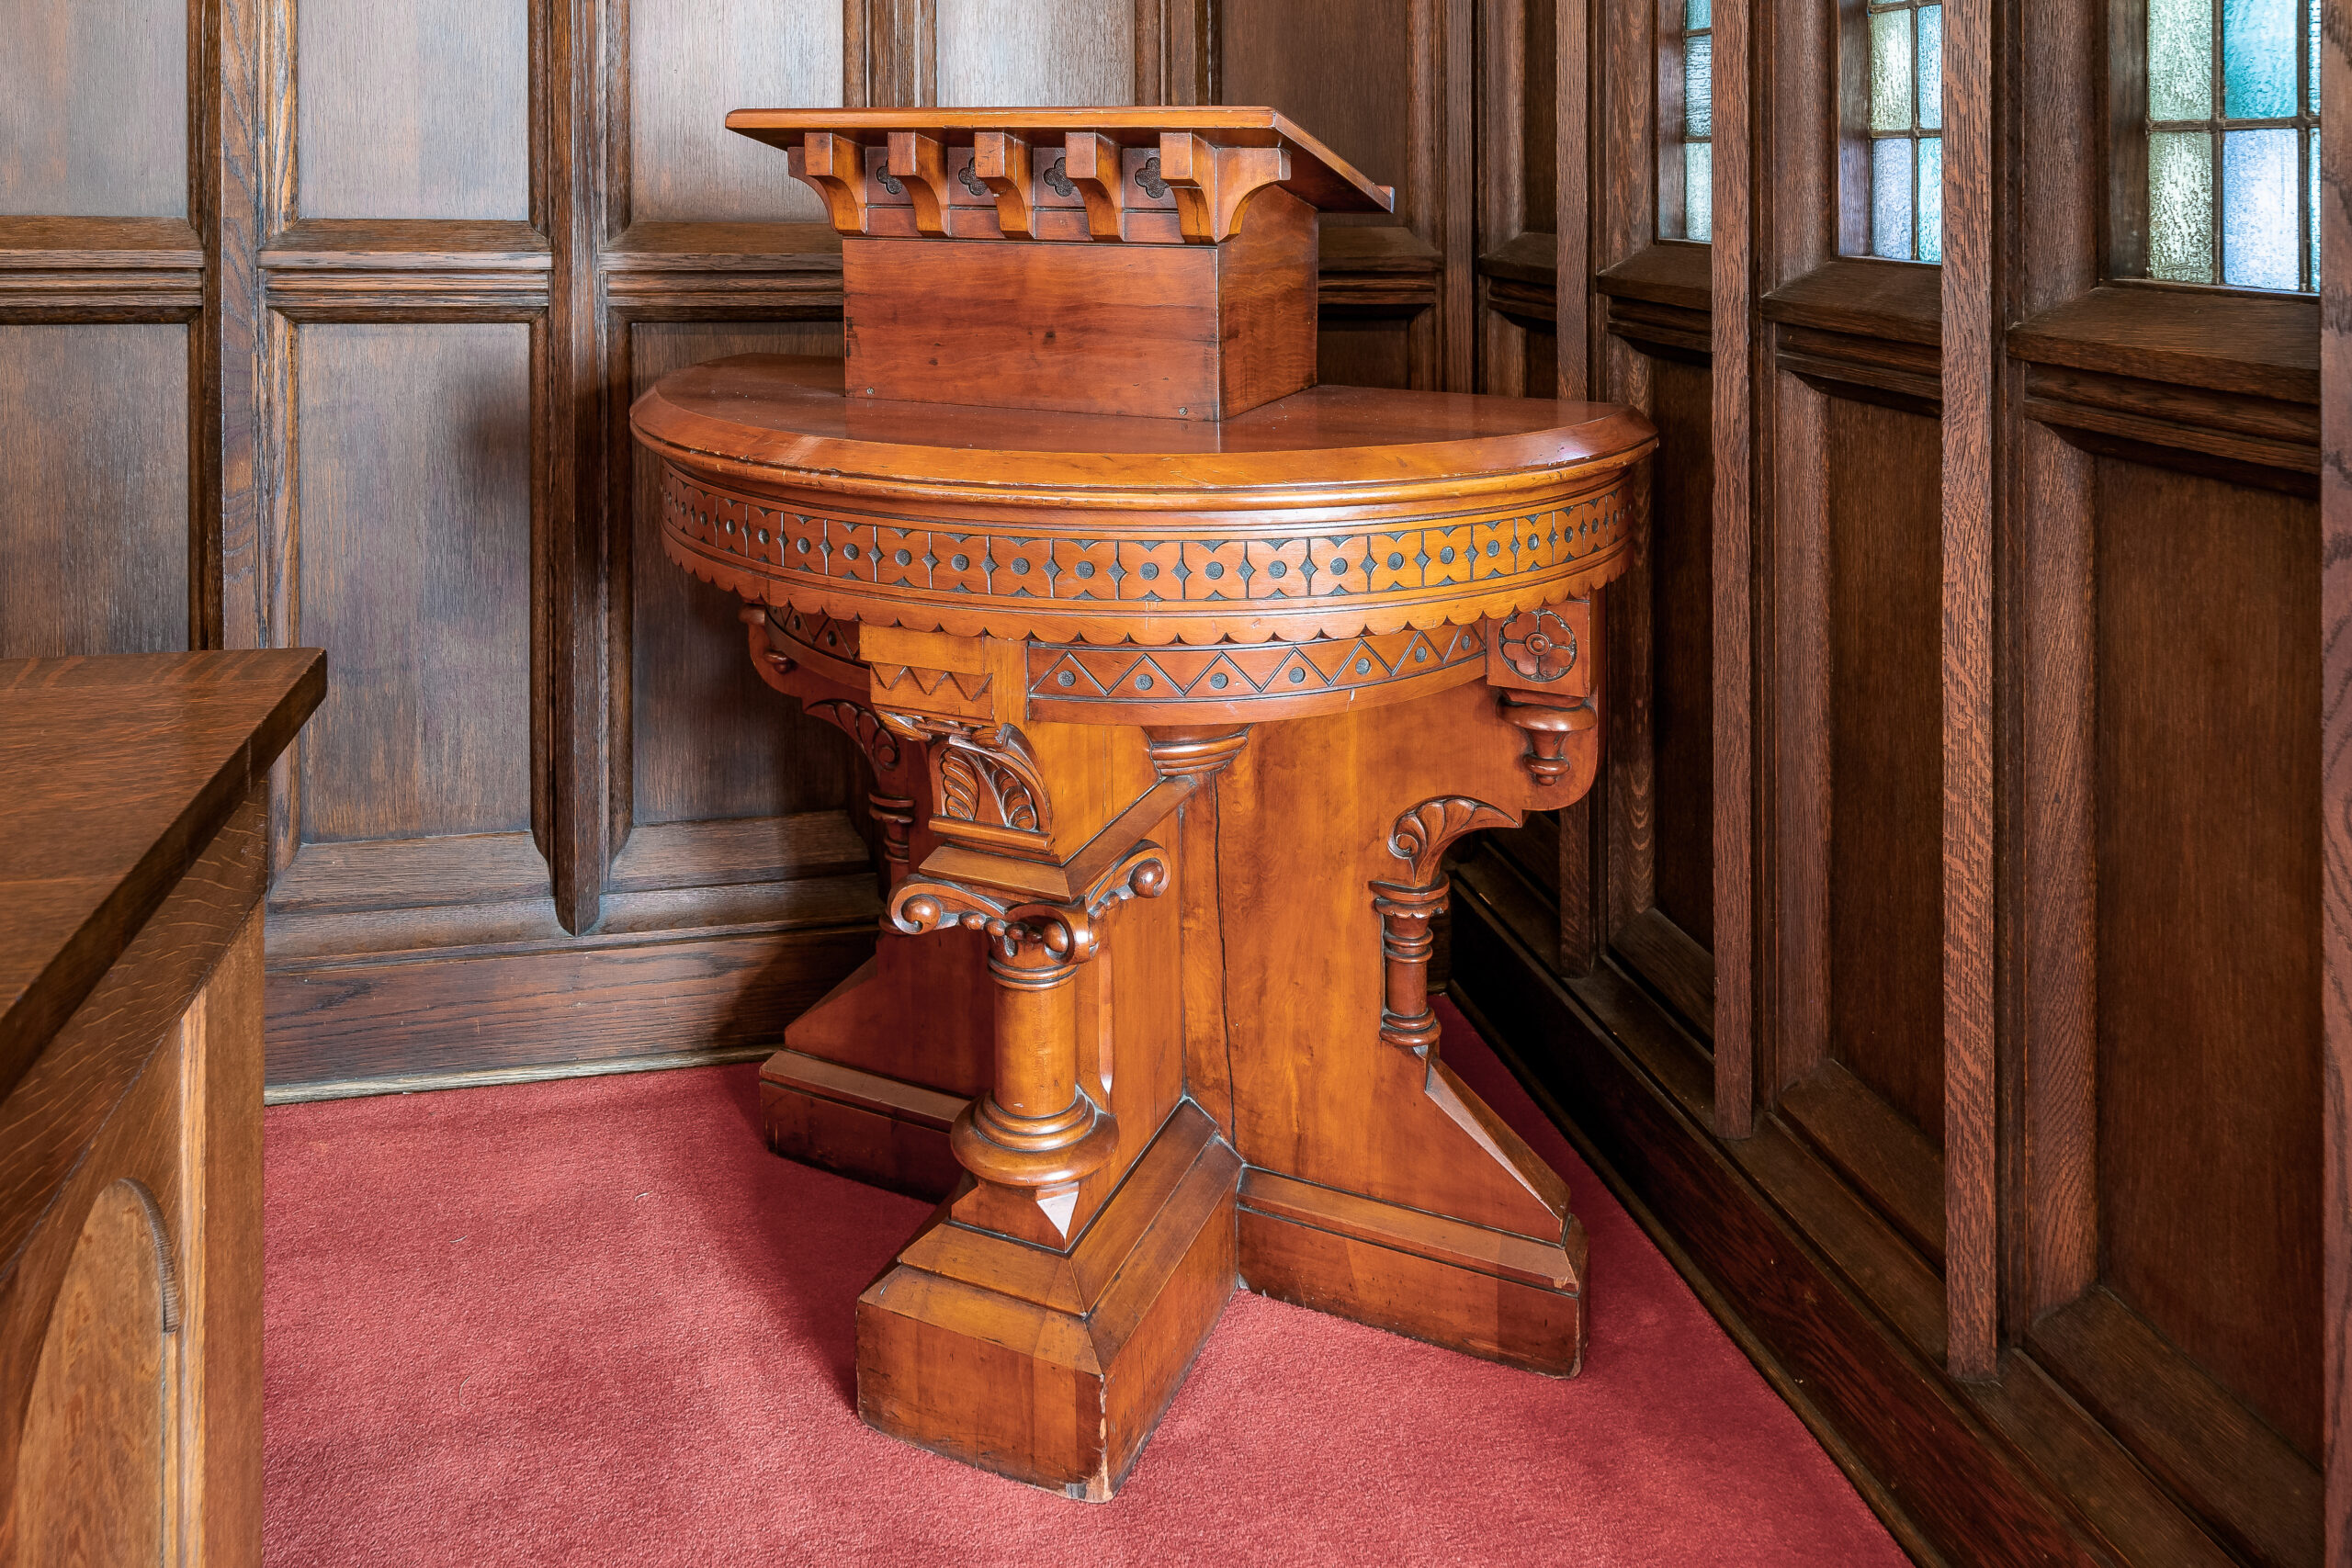 The Gladden Pulpit from the 1887 building